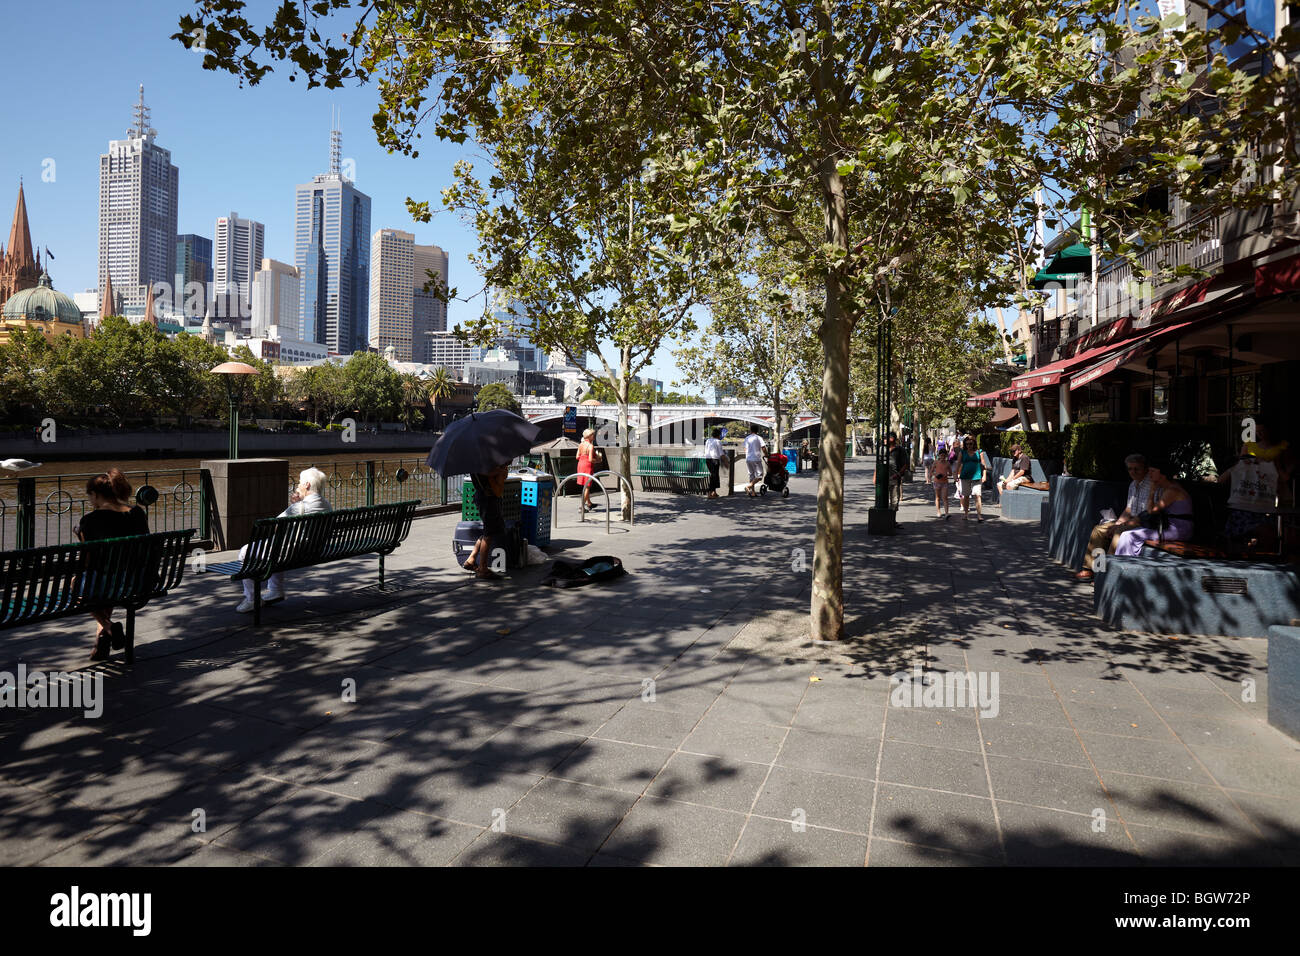 On the Southbank Promenade and city view, Melbourne, Victoria, Australia Stock Photo